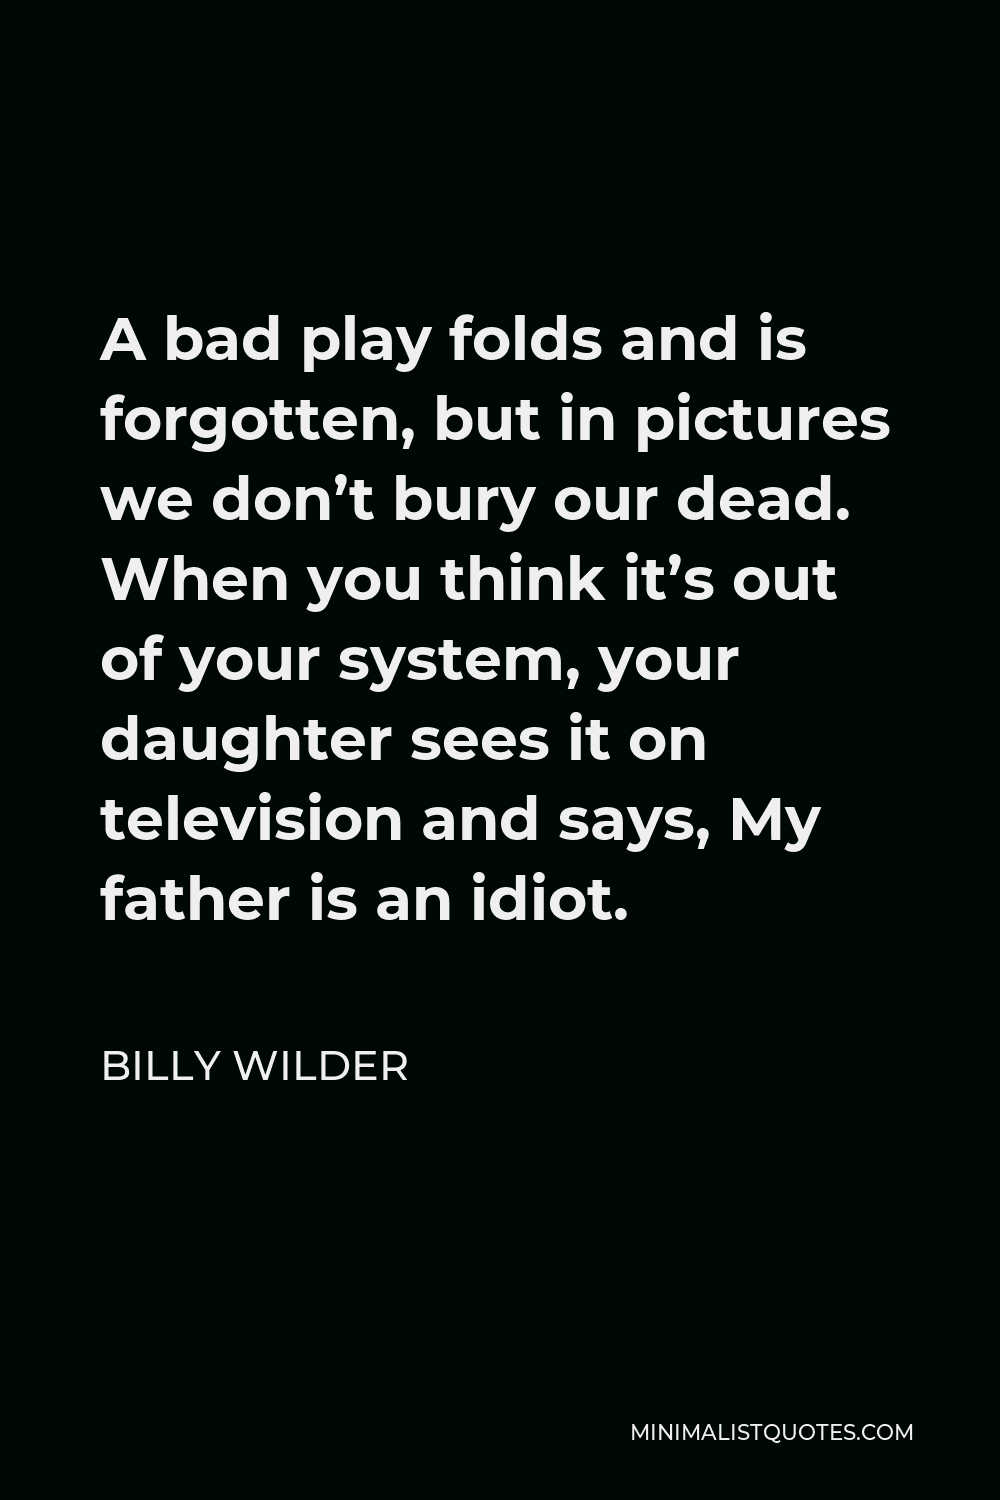 Billy Wilder Quote - A bad play folds and is forgotten, but in pictures we don’t bury our dead. When you think it’s out of your system, your daughter sees it on television and says, My father is an idiot.